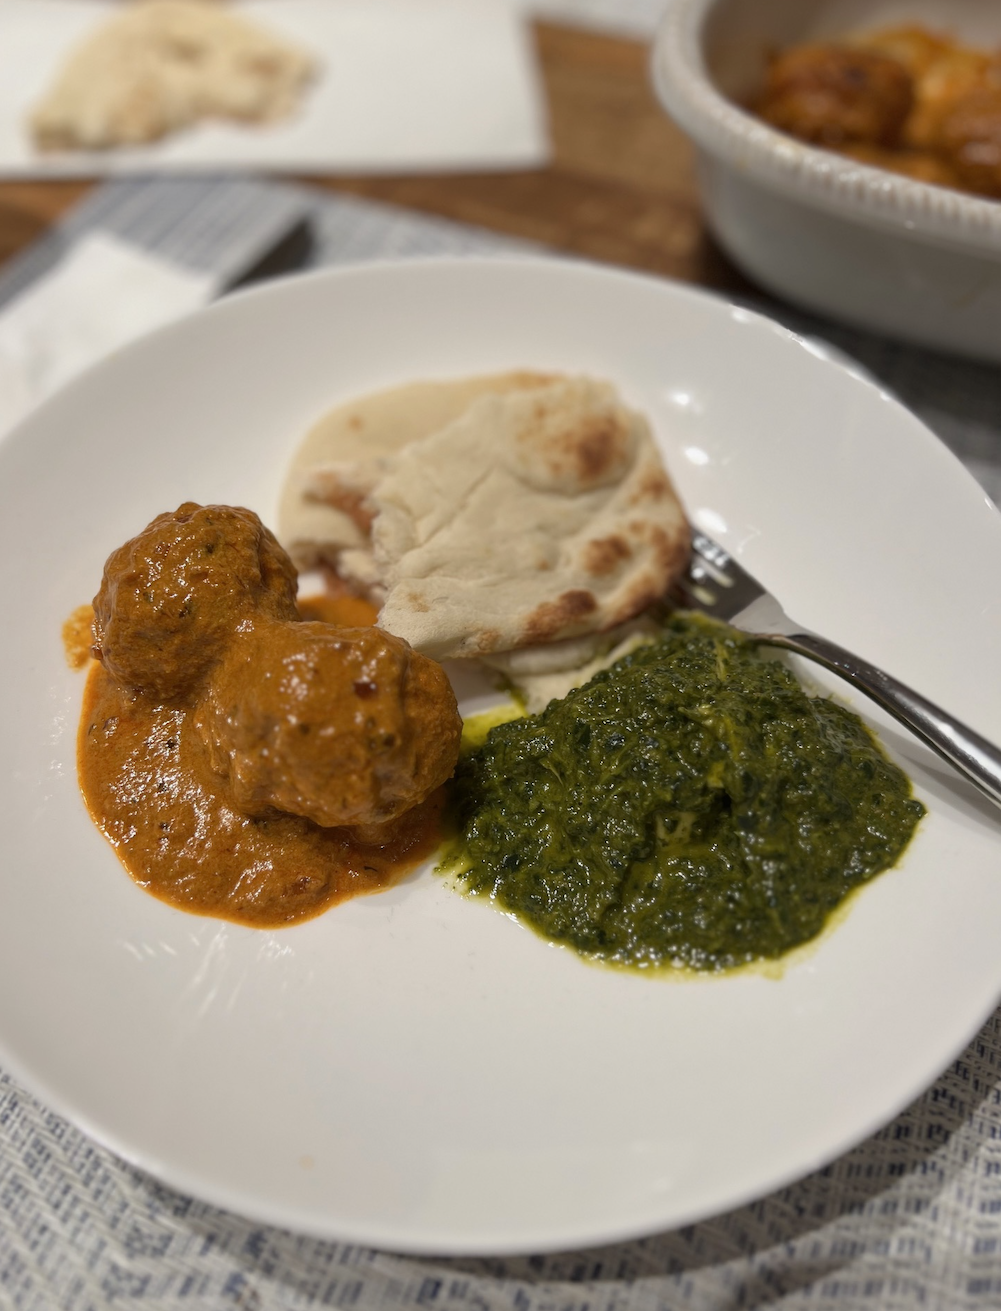 Plate with two meatballs in sauce, a side of spinach, and a piece of flatbread